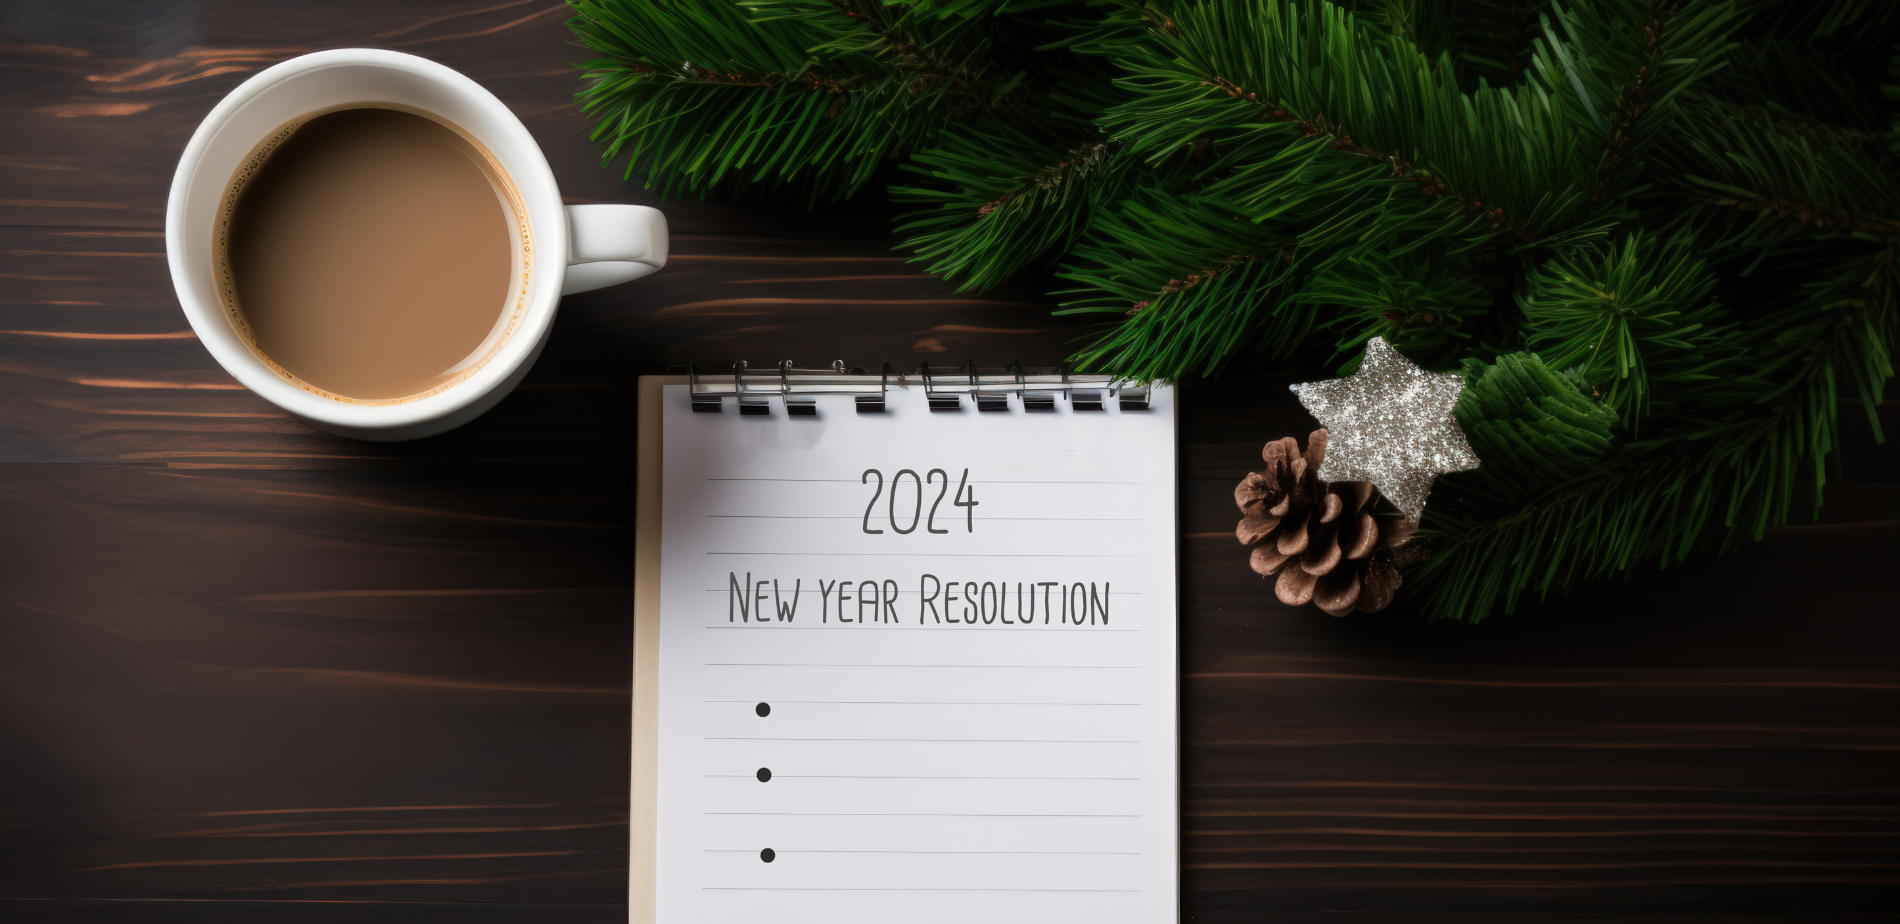 The Science Behind New Year Resolutions